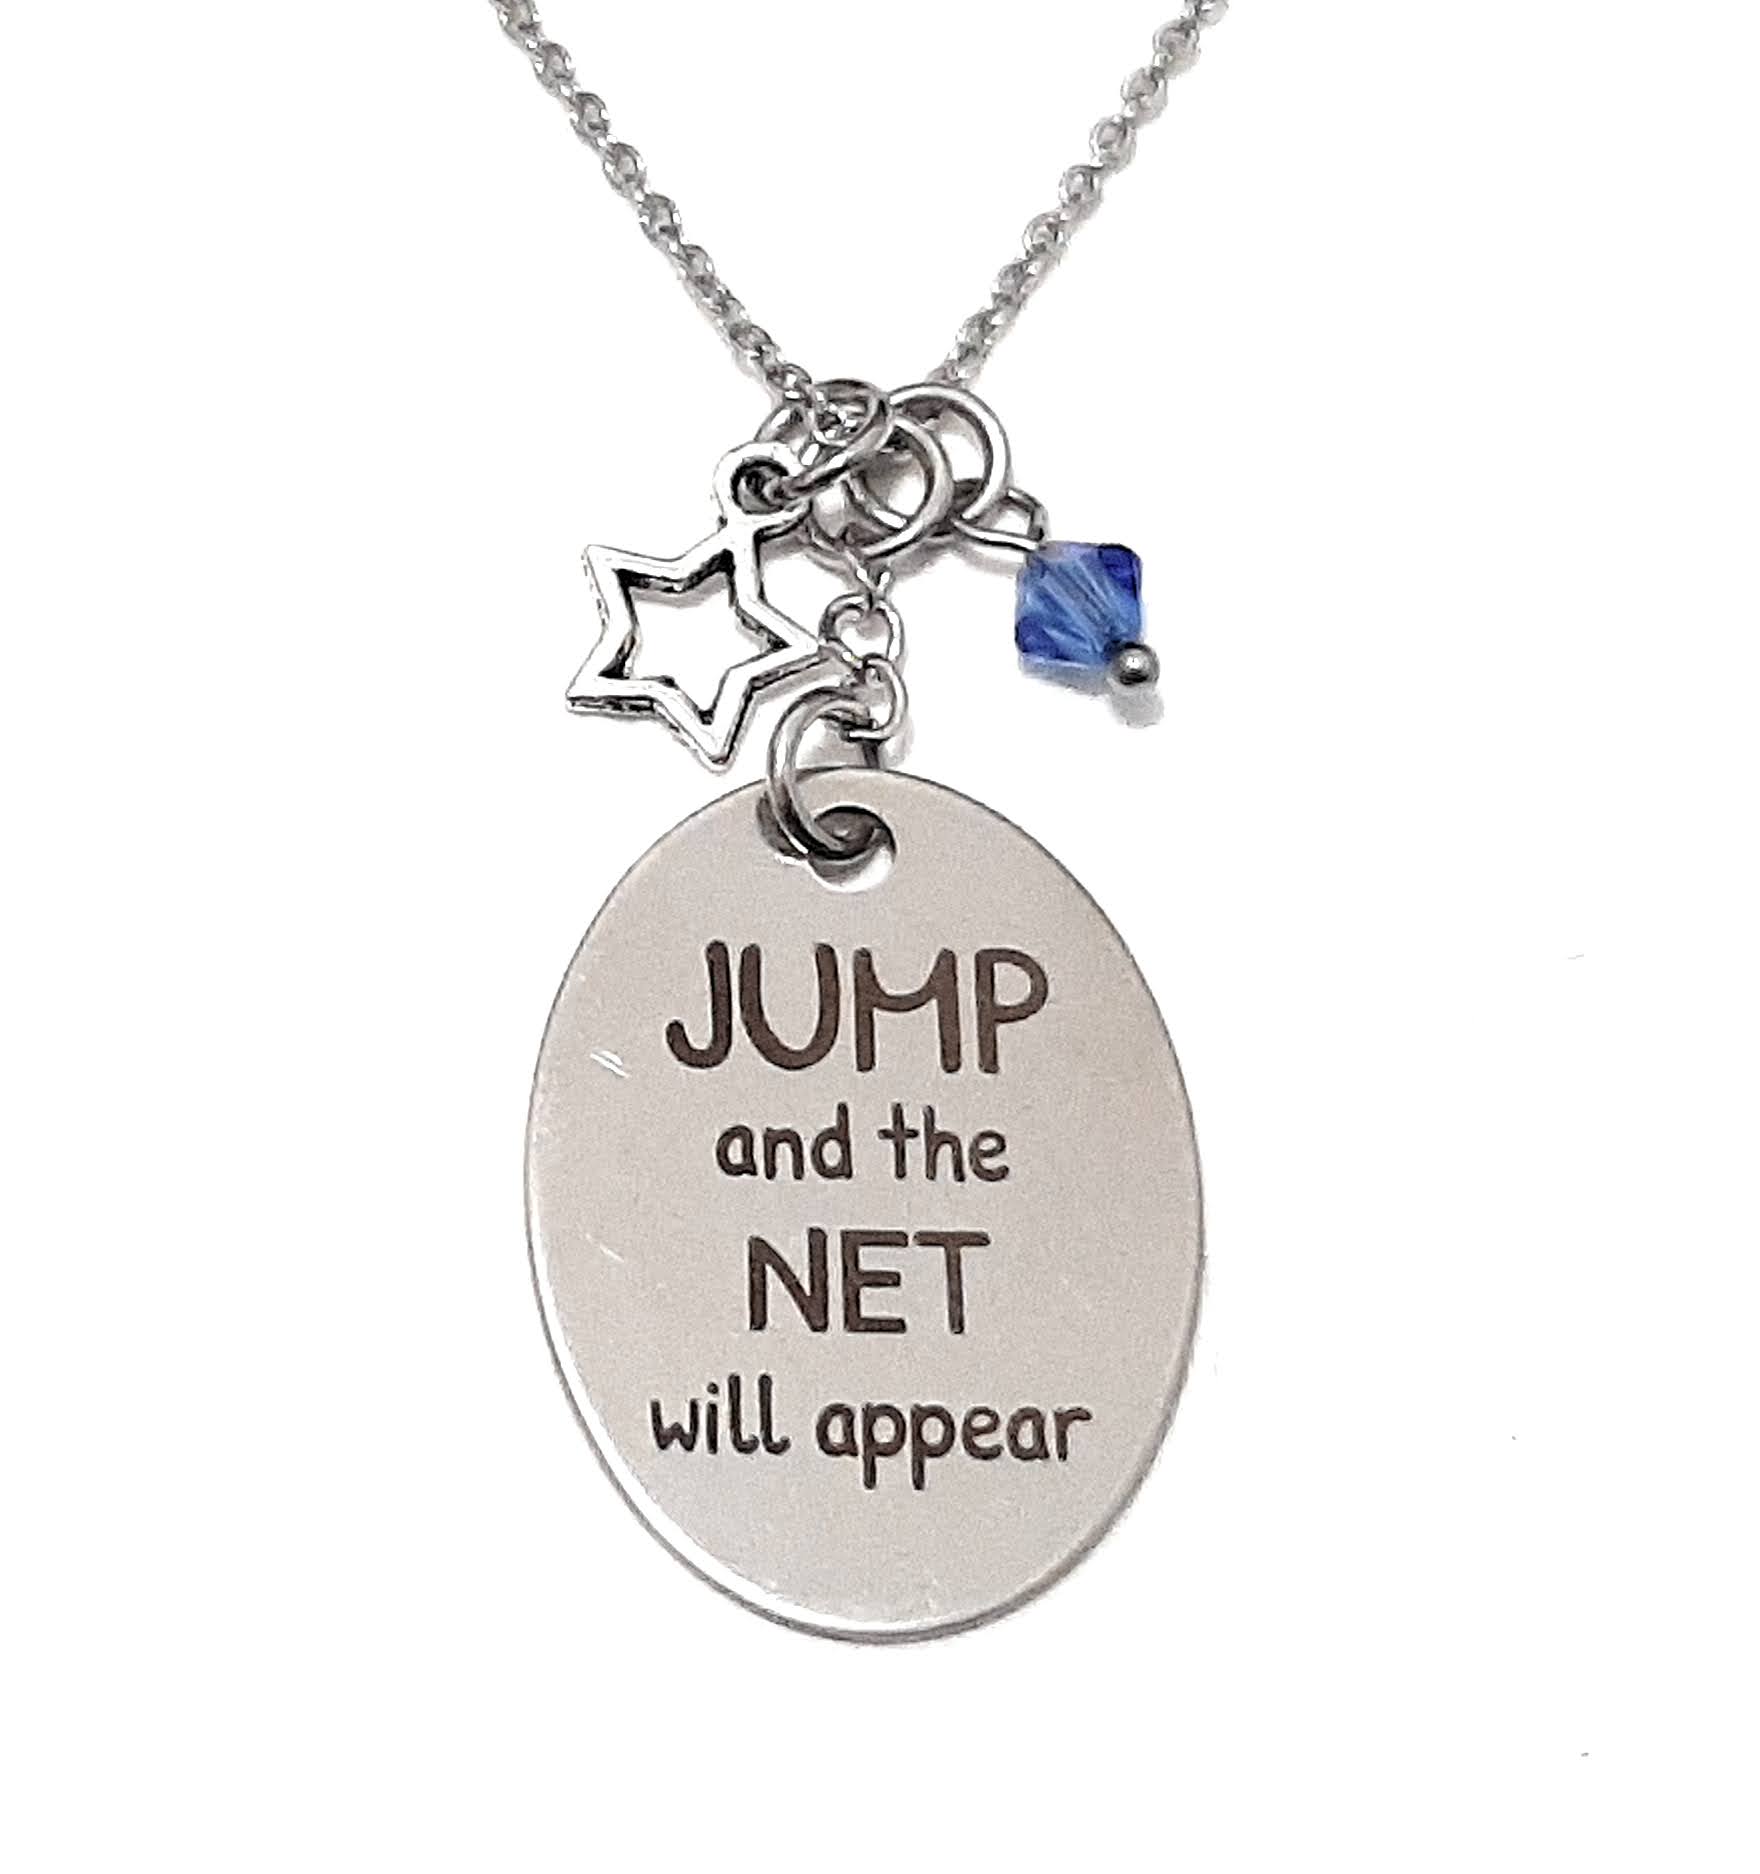 Message Pendant Necklace "Jump and the net will appear" Your Choice of Charm and Birthstone Color